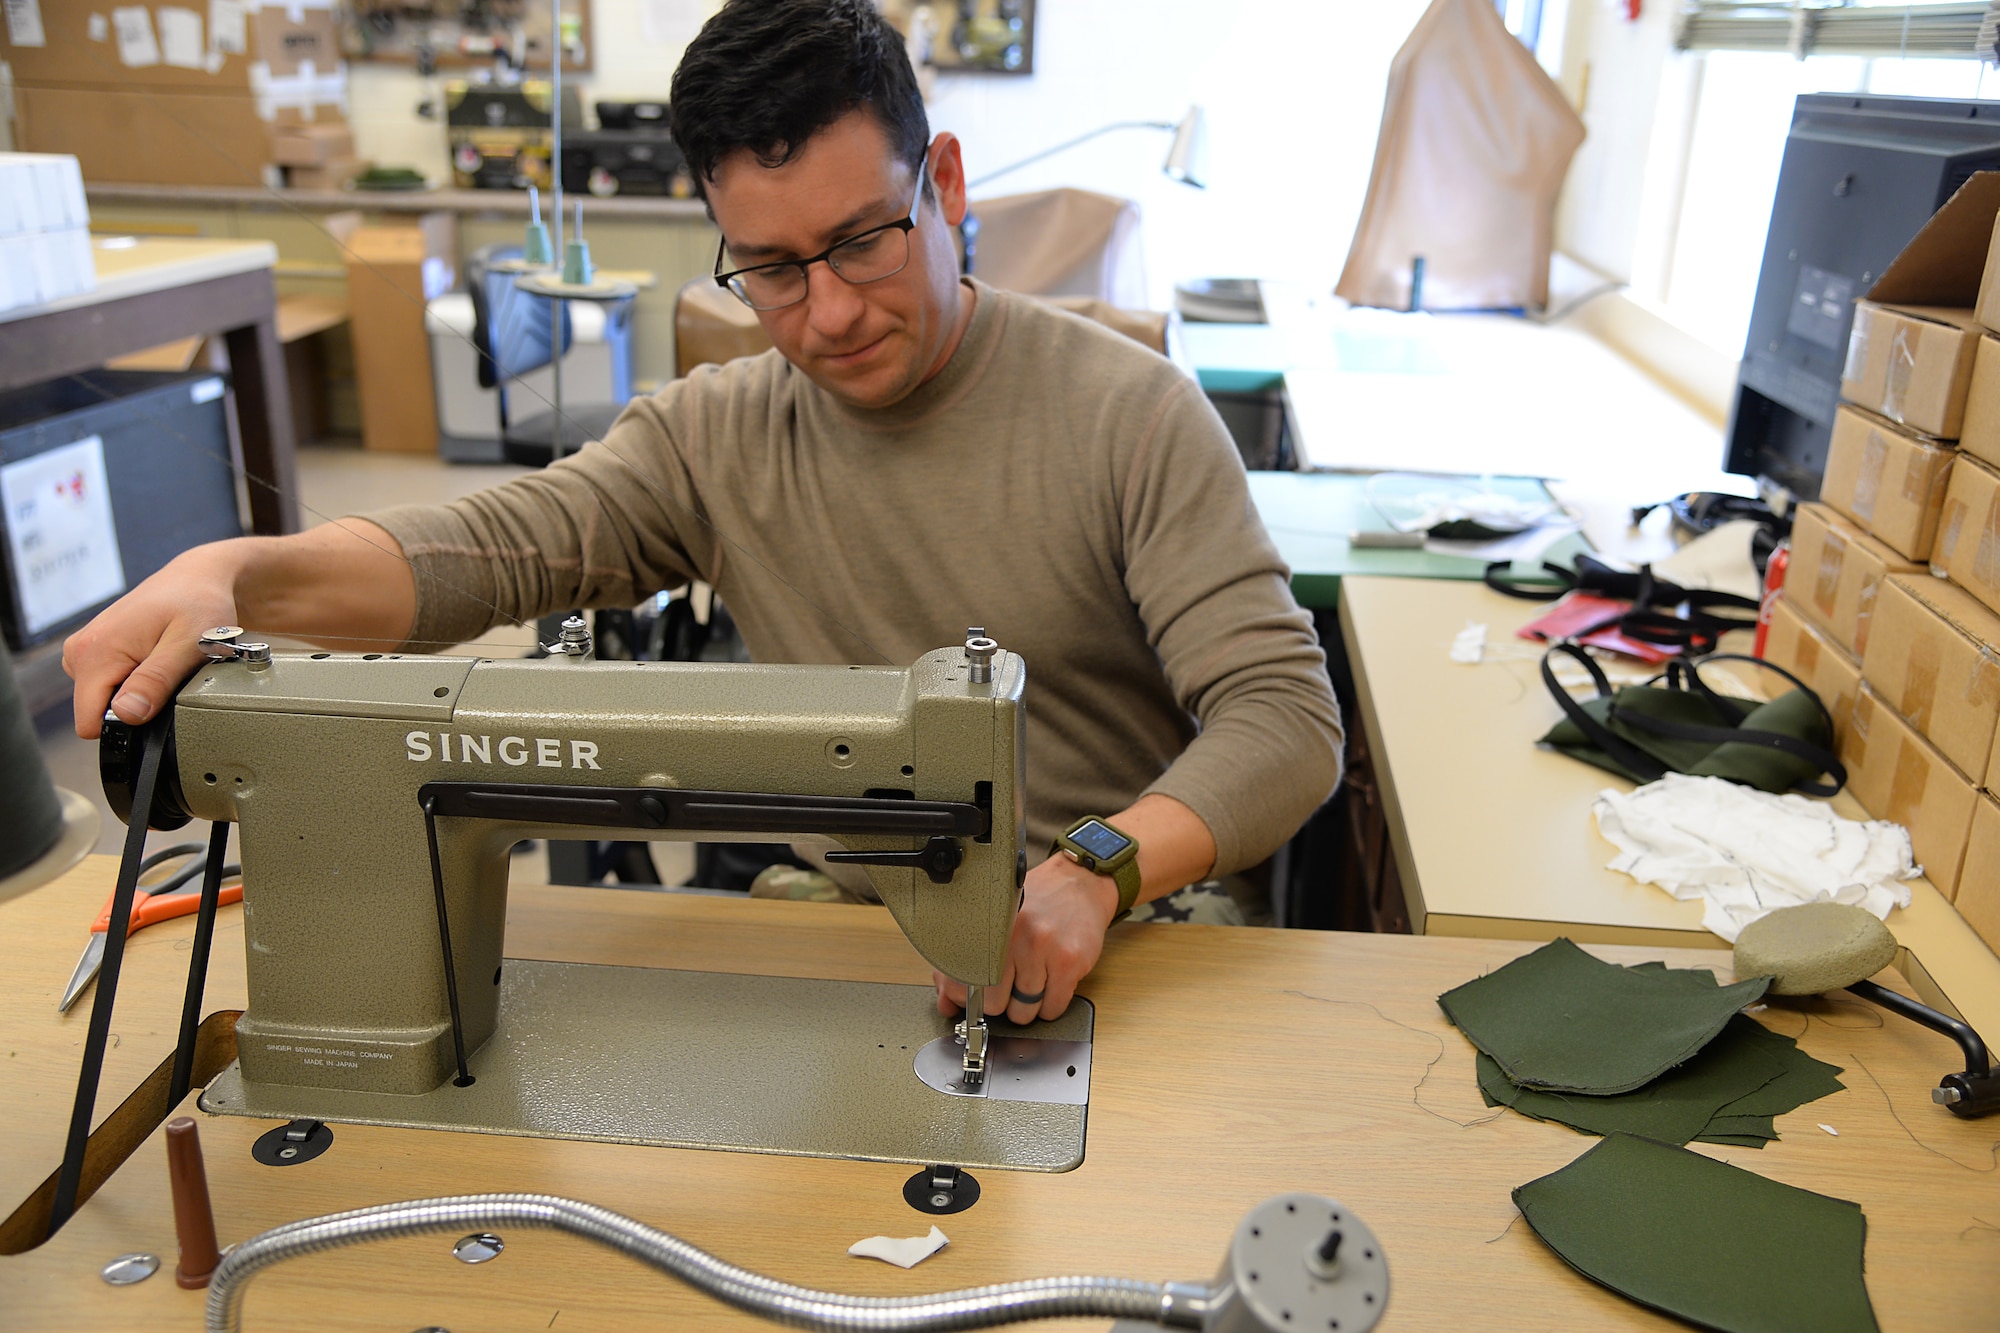 A picture of U.S. Air Force Master Sgt. Kyle P. Brier, an Aircrew Flight Equipment craftsman, sewing face masks.